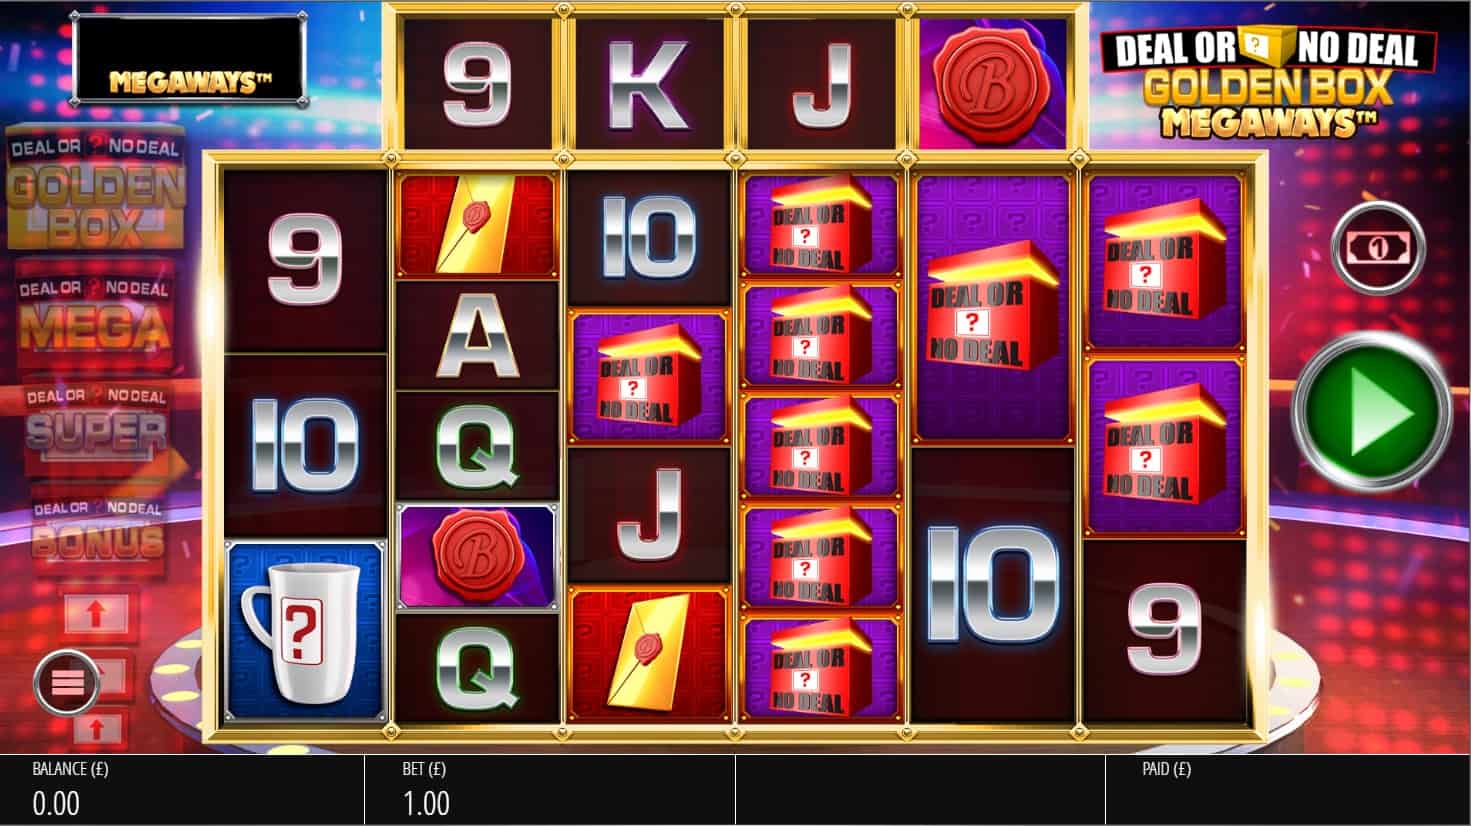 Deal or No Deal Golden Box Megaways Slot Review by Our Experts at E-Vegas.com